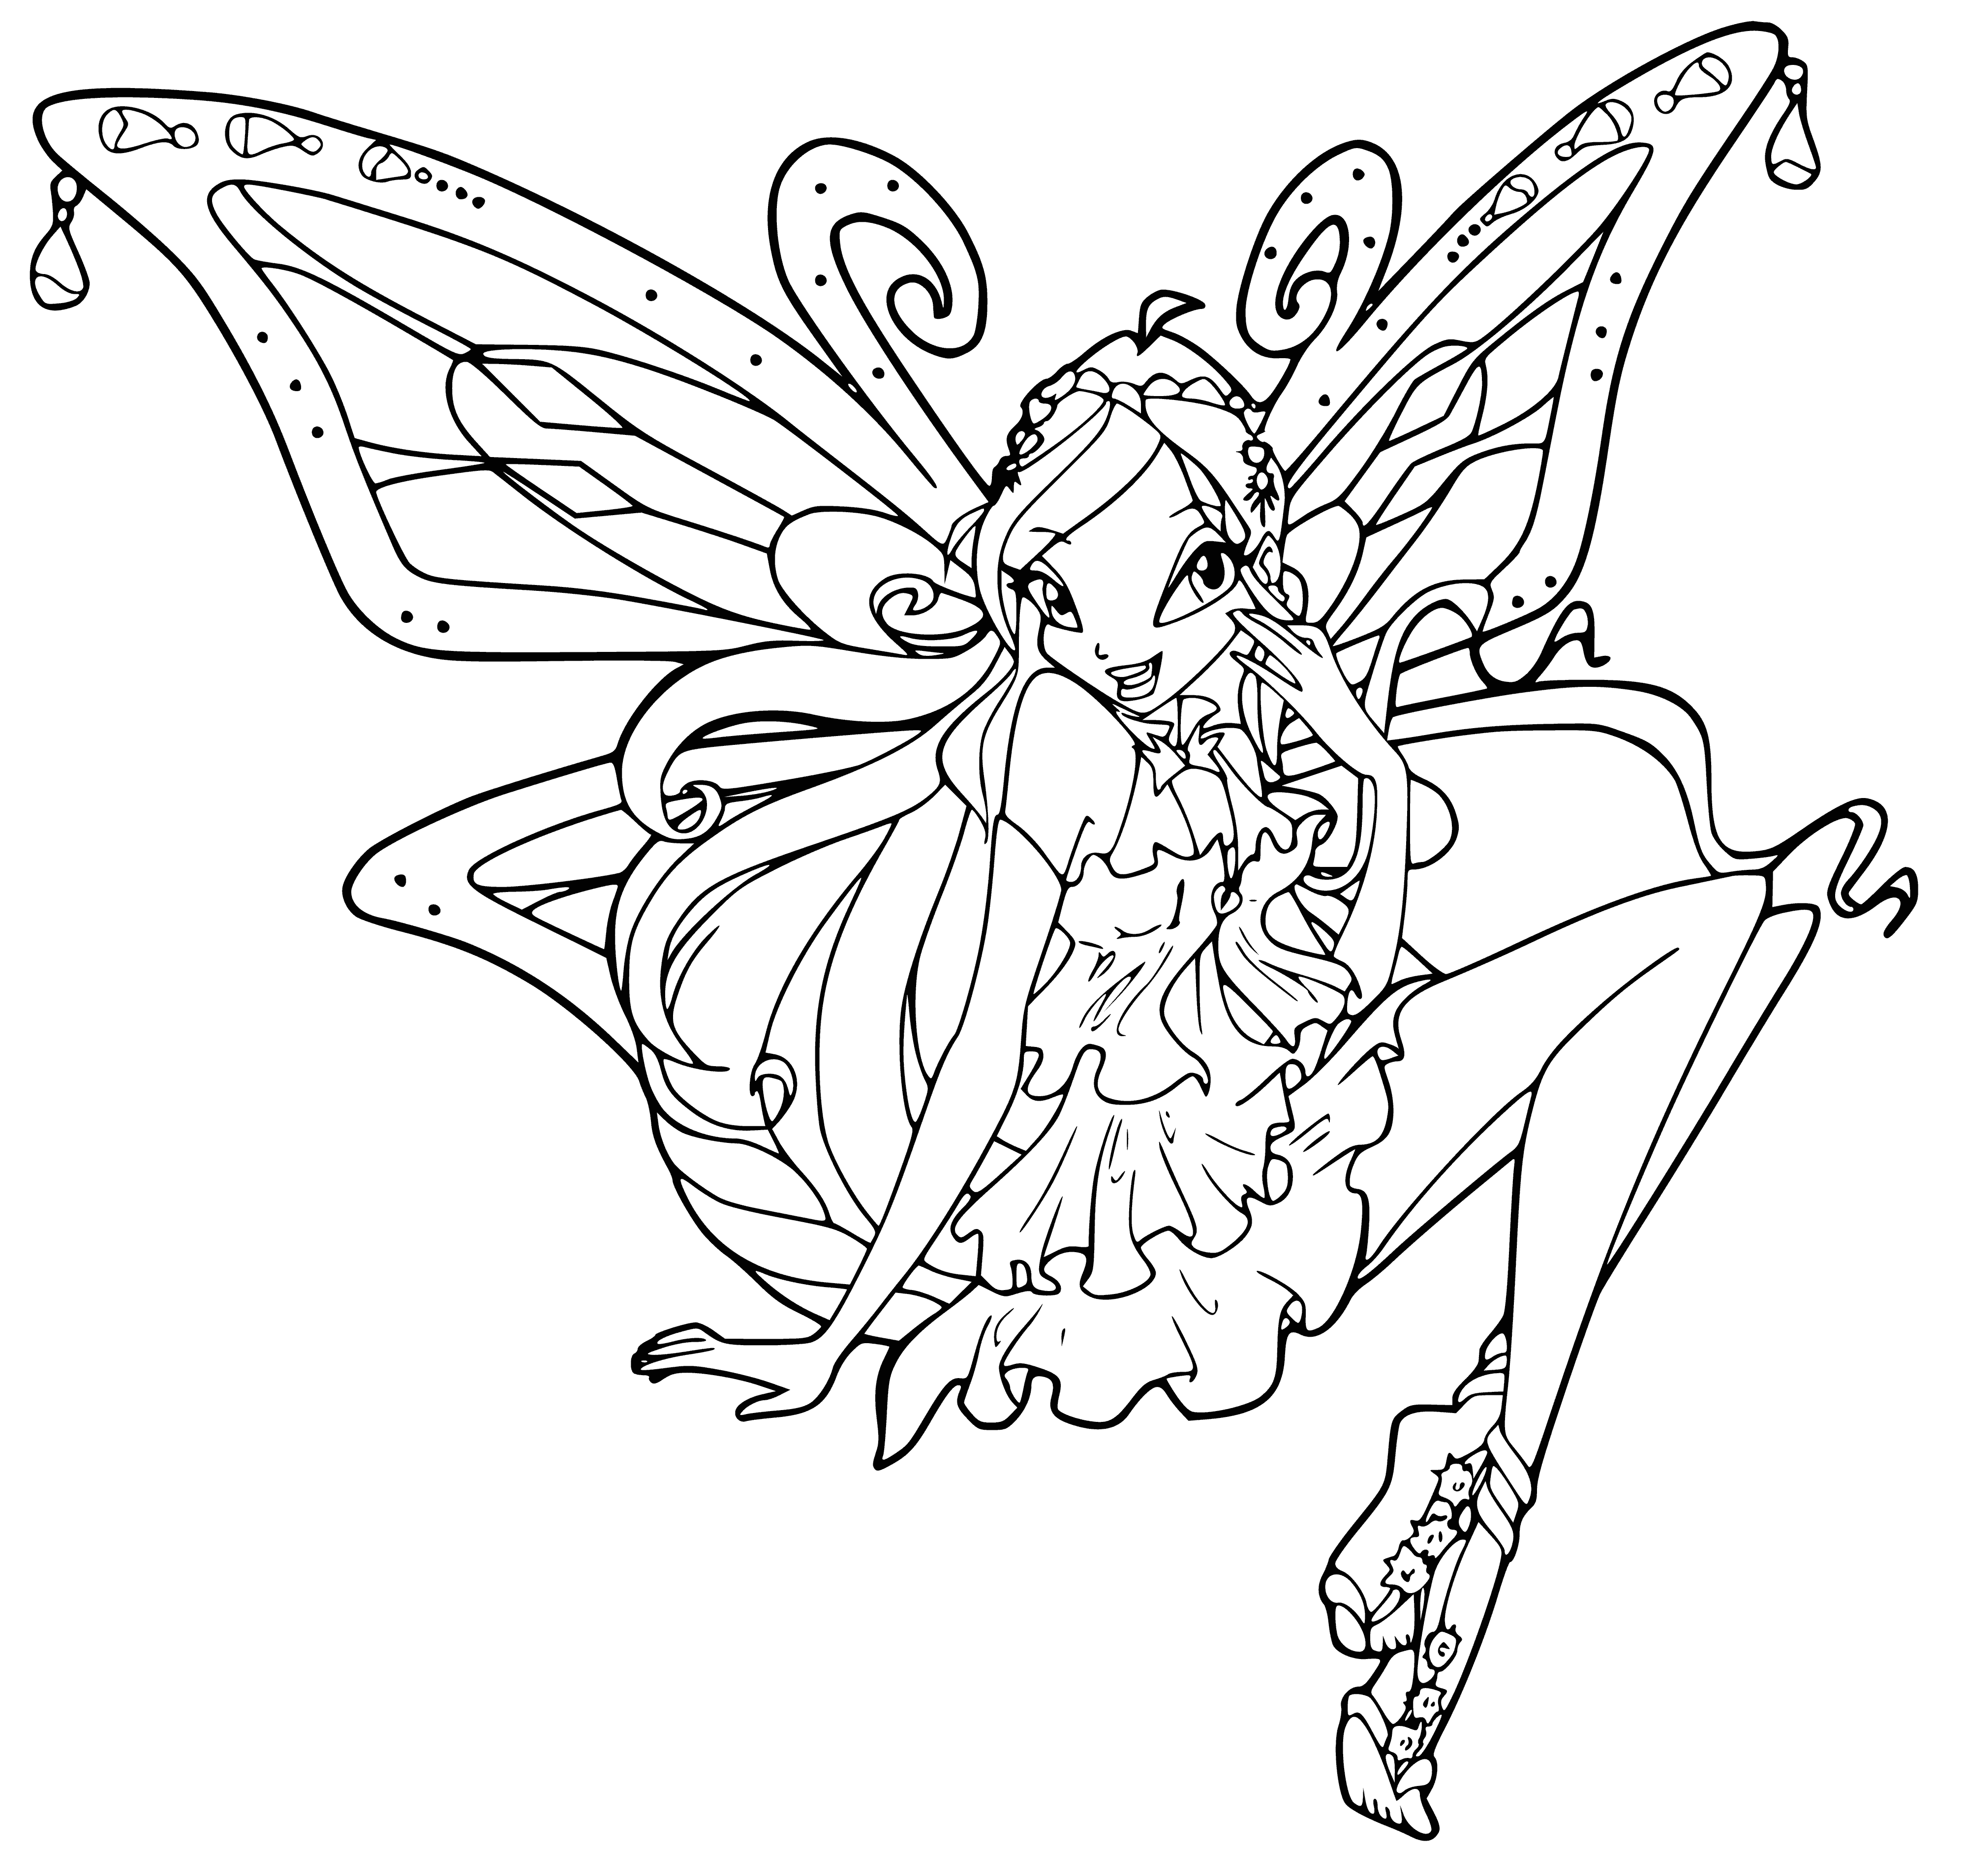 coloring page: Girl wearing pink dress, tiara & holding pink wand with white star. Blue eyes & small mouth. Background of pink butterfly shape.